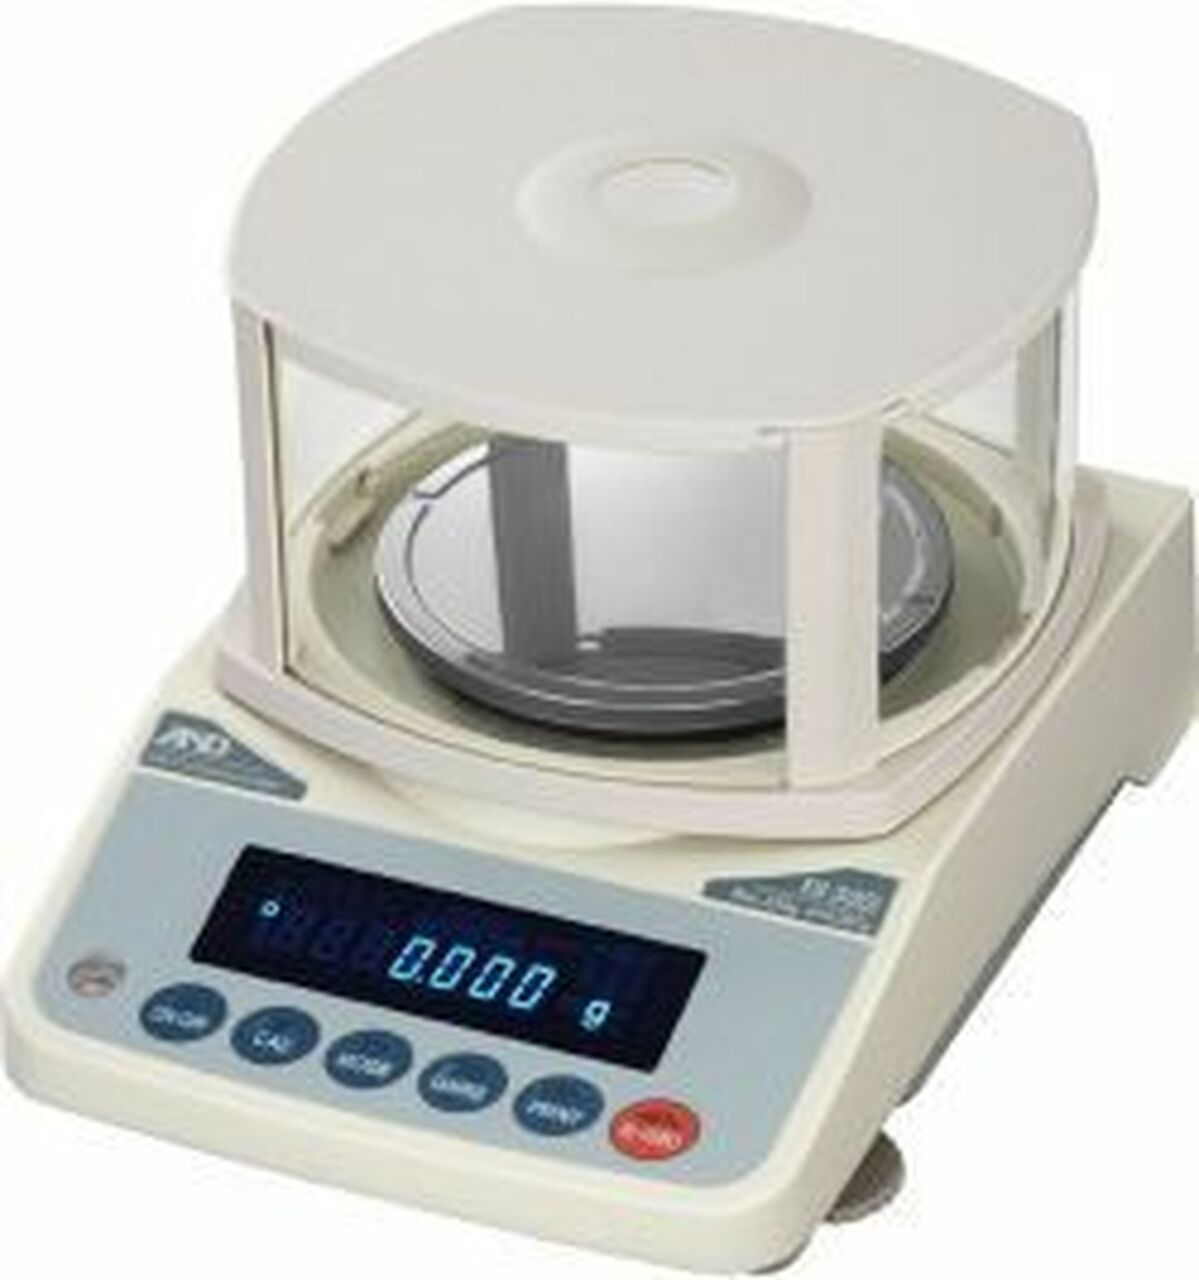 A&D WEIGHING FX-300IN PRECISION BALANCE